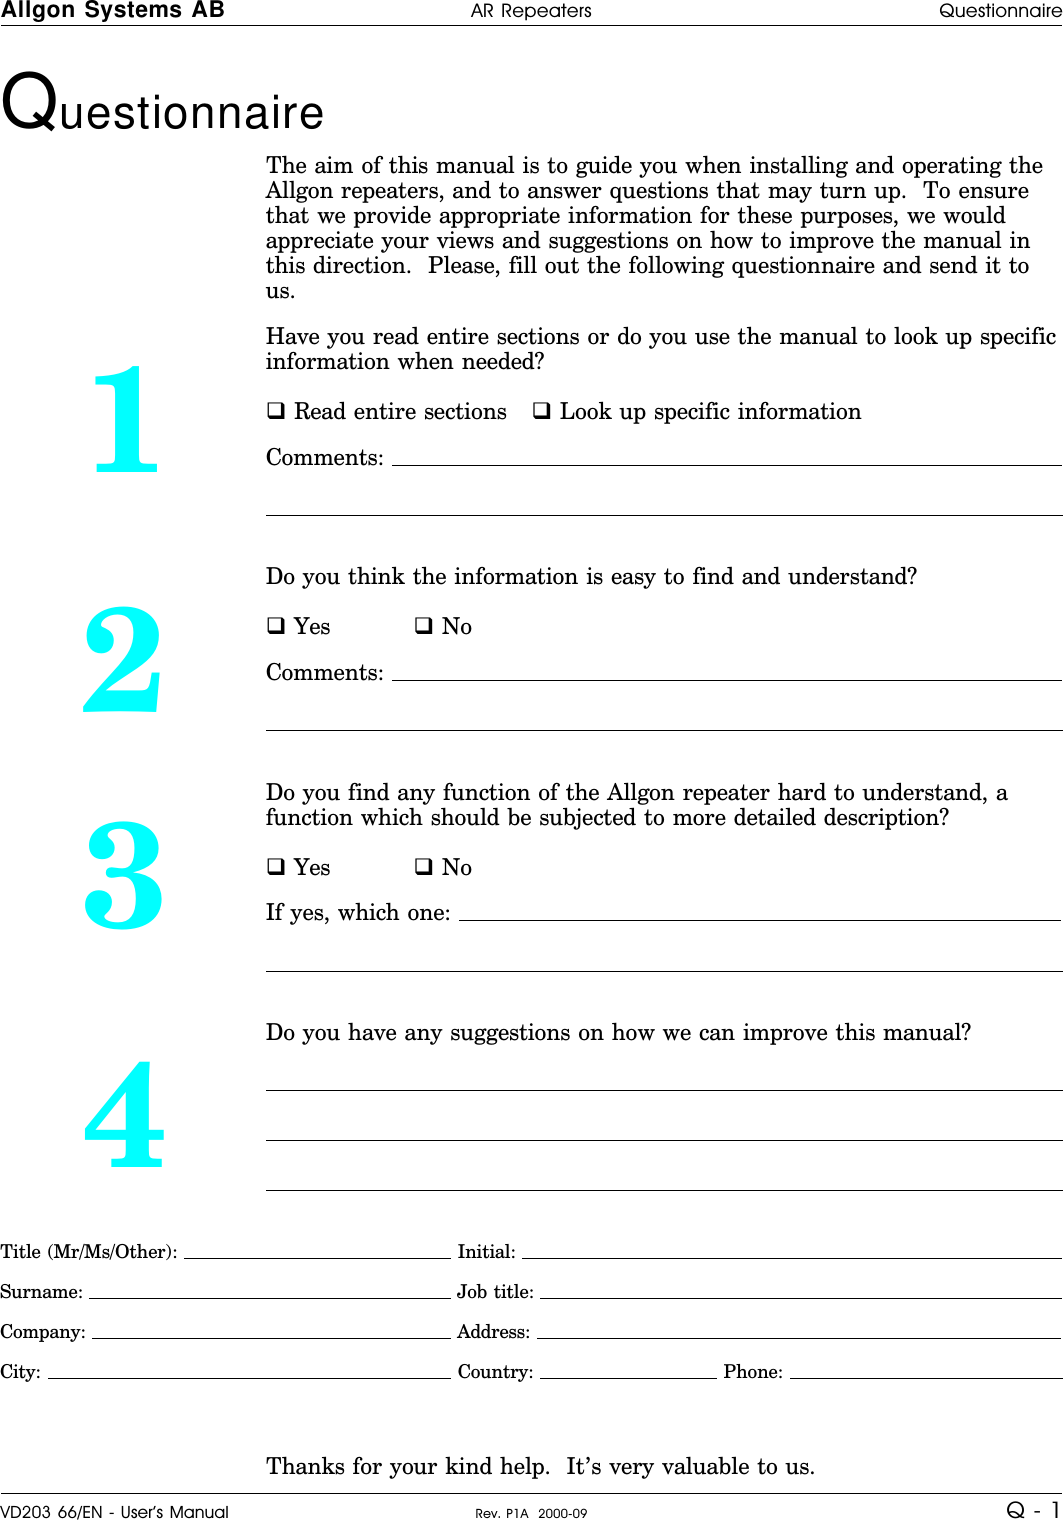 Questionnaire The aim of this manual is to guide you when installing and operating theAllgon repeaters, and to answer questions that may turn up.  To ensurethat we provide appropriate information for these purposes, we wouldappreciate your views and suggestions on how to improve the manual inthis direction.  Please, fill out the following questionnaire and send it tous.1Have you read entire sections or do you use the manual to look up specificinformation when needed?q Read entire sections q Look up specific informationComments: 2Do you think the information is easy to find and understand?q Yes q NoComments: 3Do you find any function of the Allgon repeater hard to understand, afunction which should be subjected to more detailed description?q Yes q NoIf yes, which one: 4Do you have any suggestions on how we can improve this manual?Title (Mr/Ms/Other):   Initial: Surname:  Job title: Company:  Address: City:   Country:   Phone: Thanks for your kind help.  It’s very valuable to us.Allgon Systems AB AR Repeaters QuestionnaireVD203 66/EN - User’s Manual Rev. P1A  2000-09 Q - 1